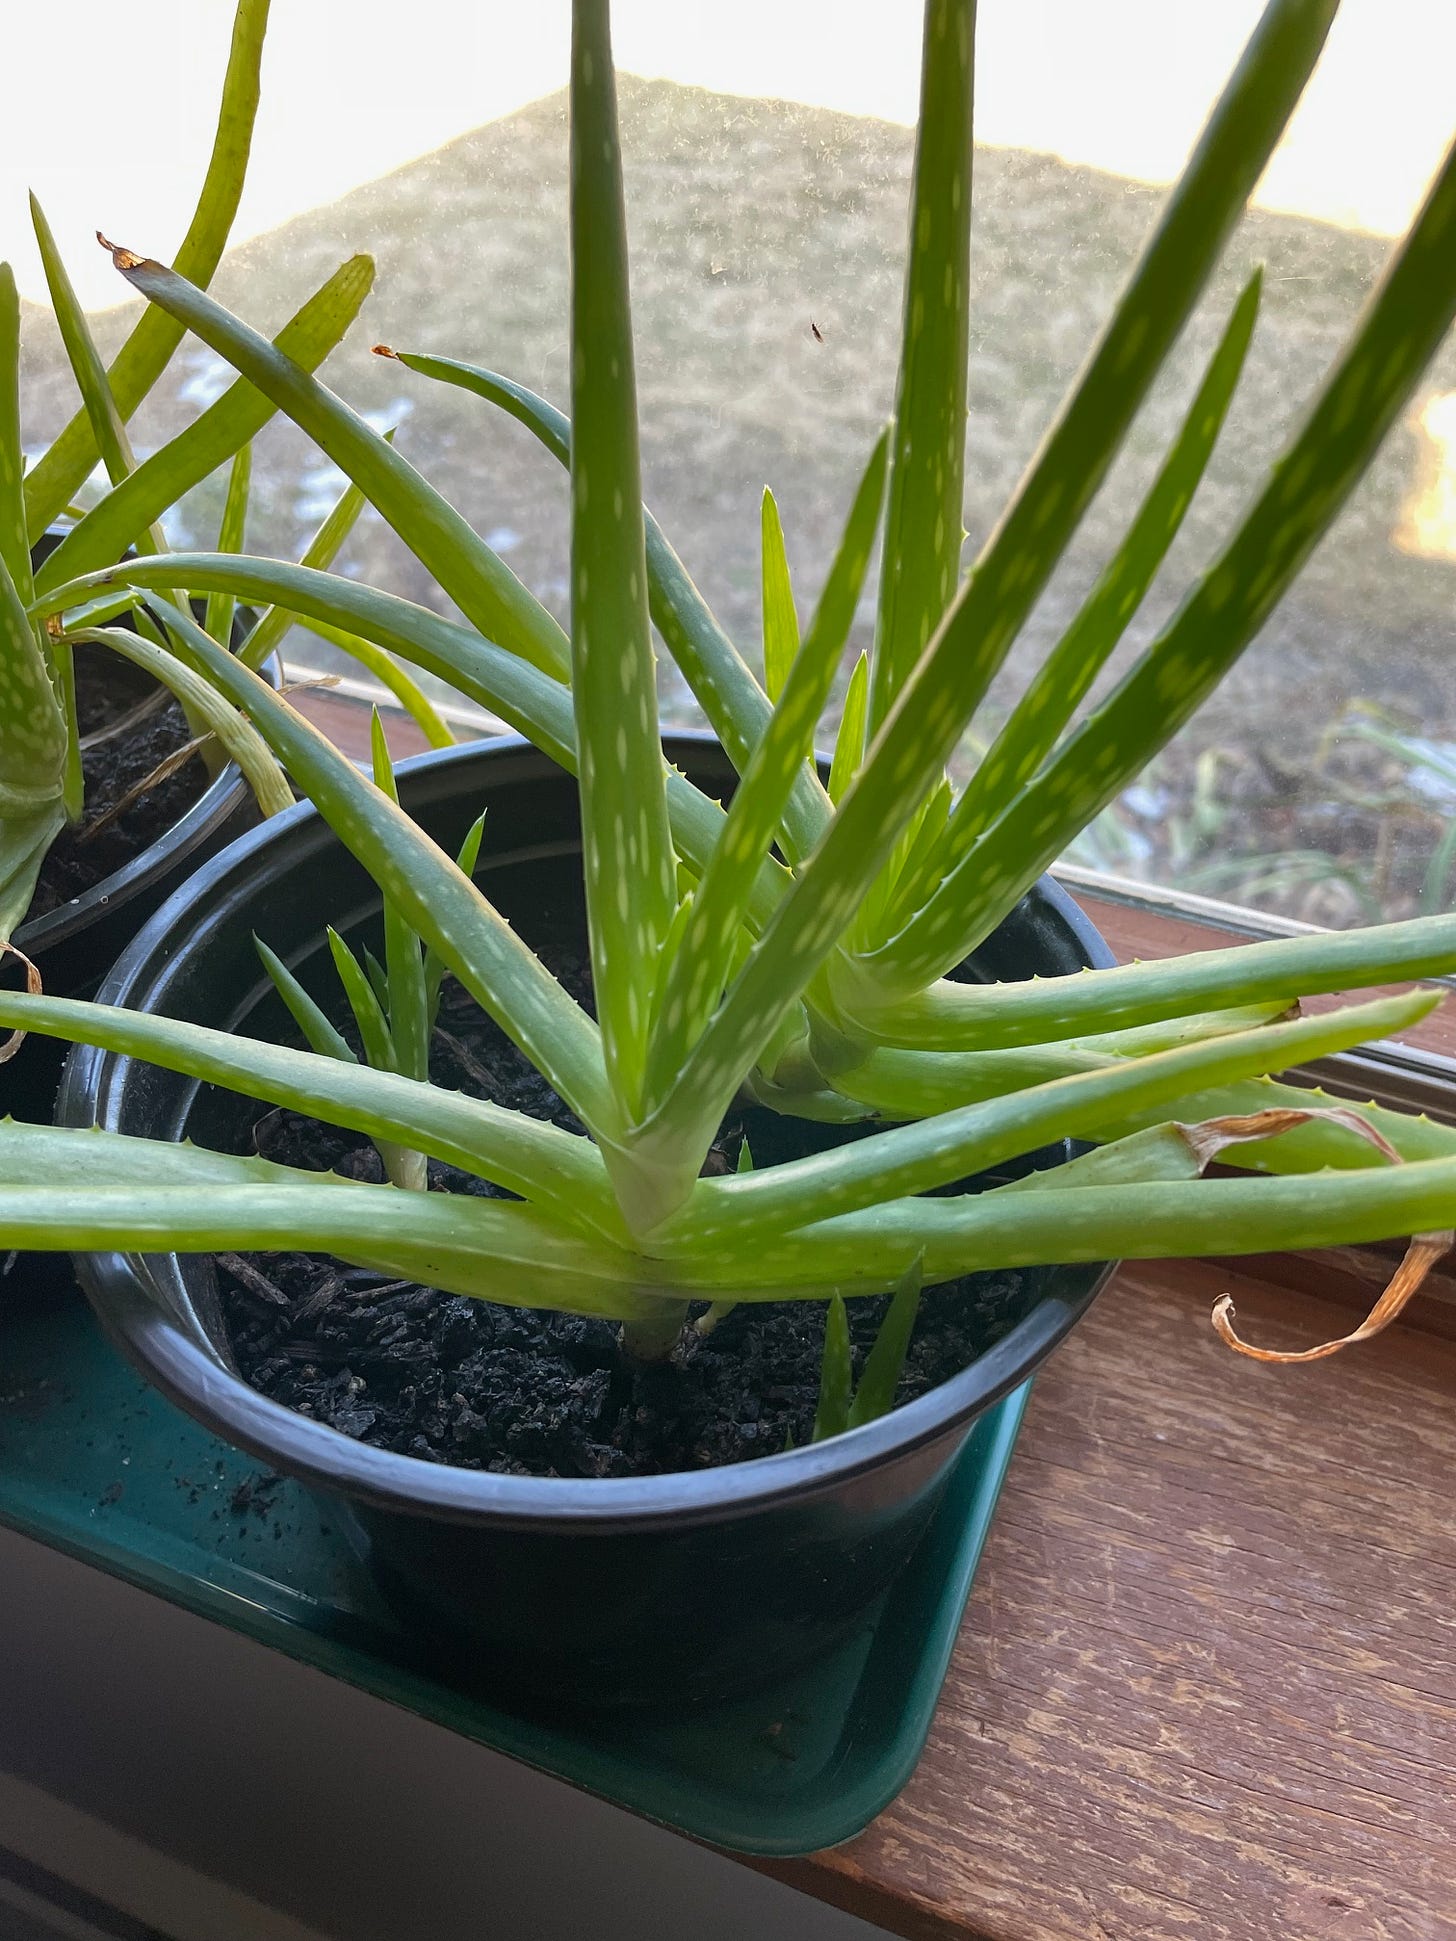 If you subject Aloe vera to  a bit of stress and dryness, it will reproduce by making suckers - little clones of itself. 